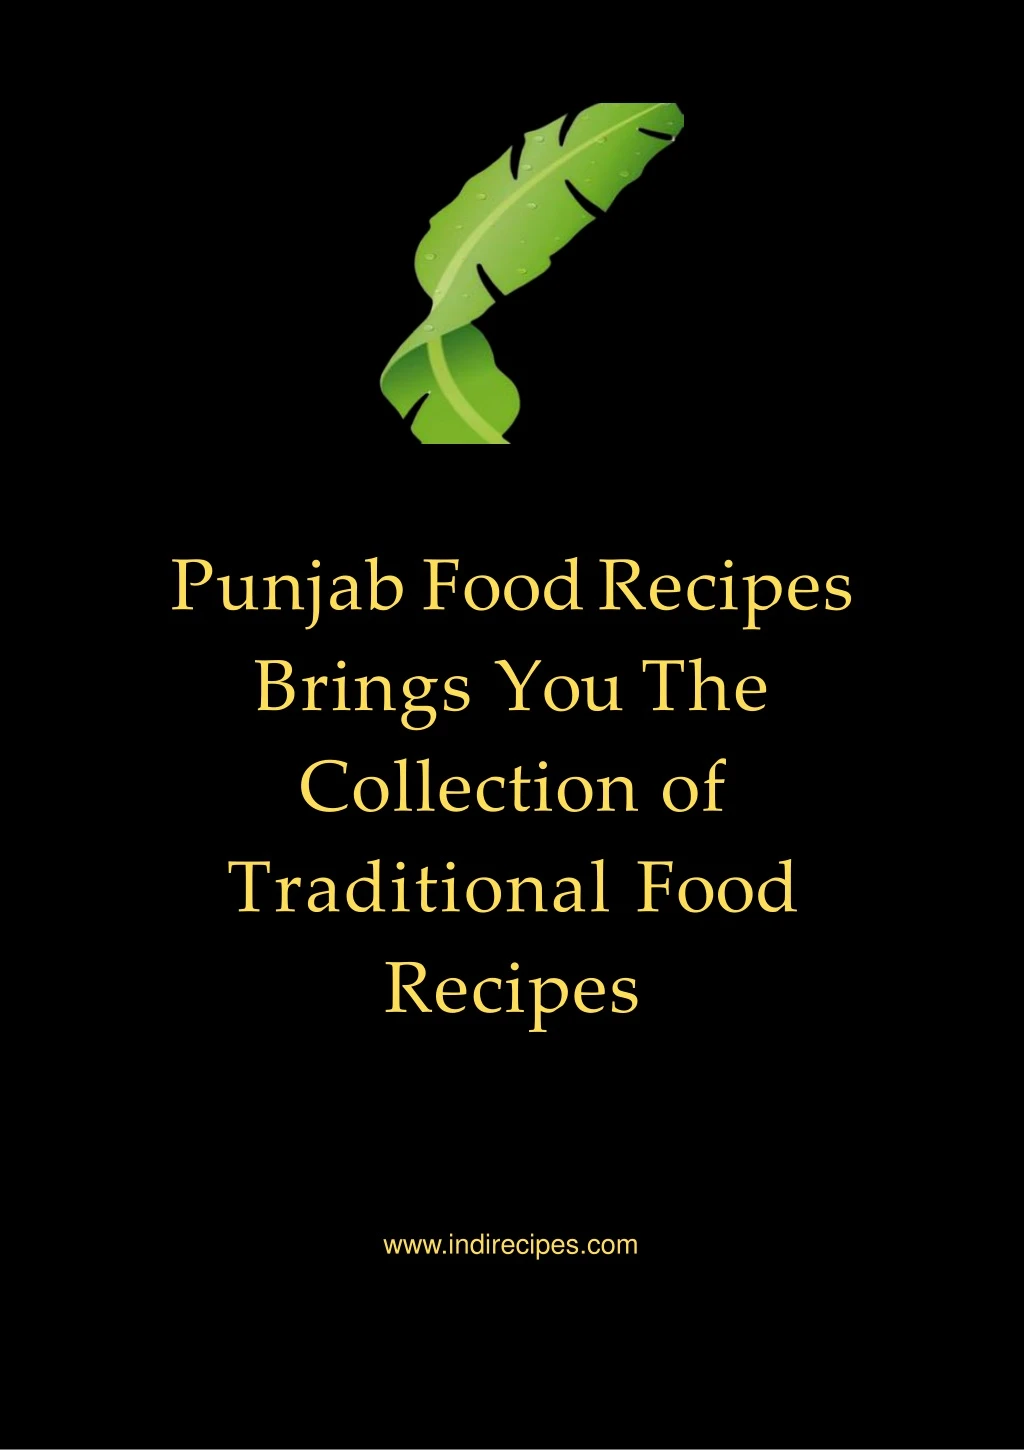 PPT - Punjabi Food Recipes Brings You The Collection of Traditional ...